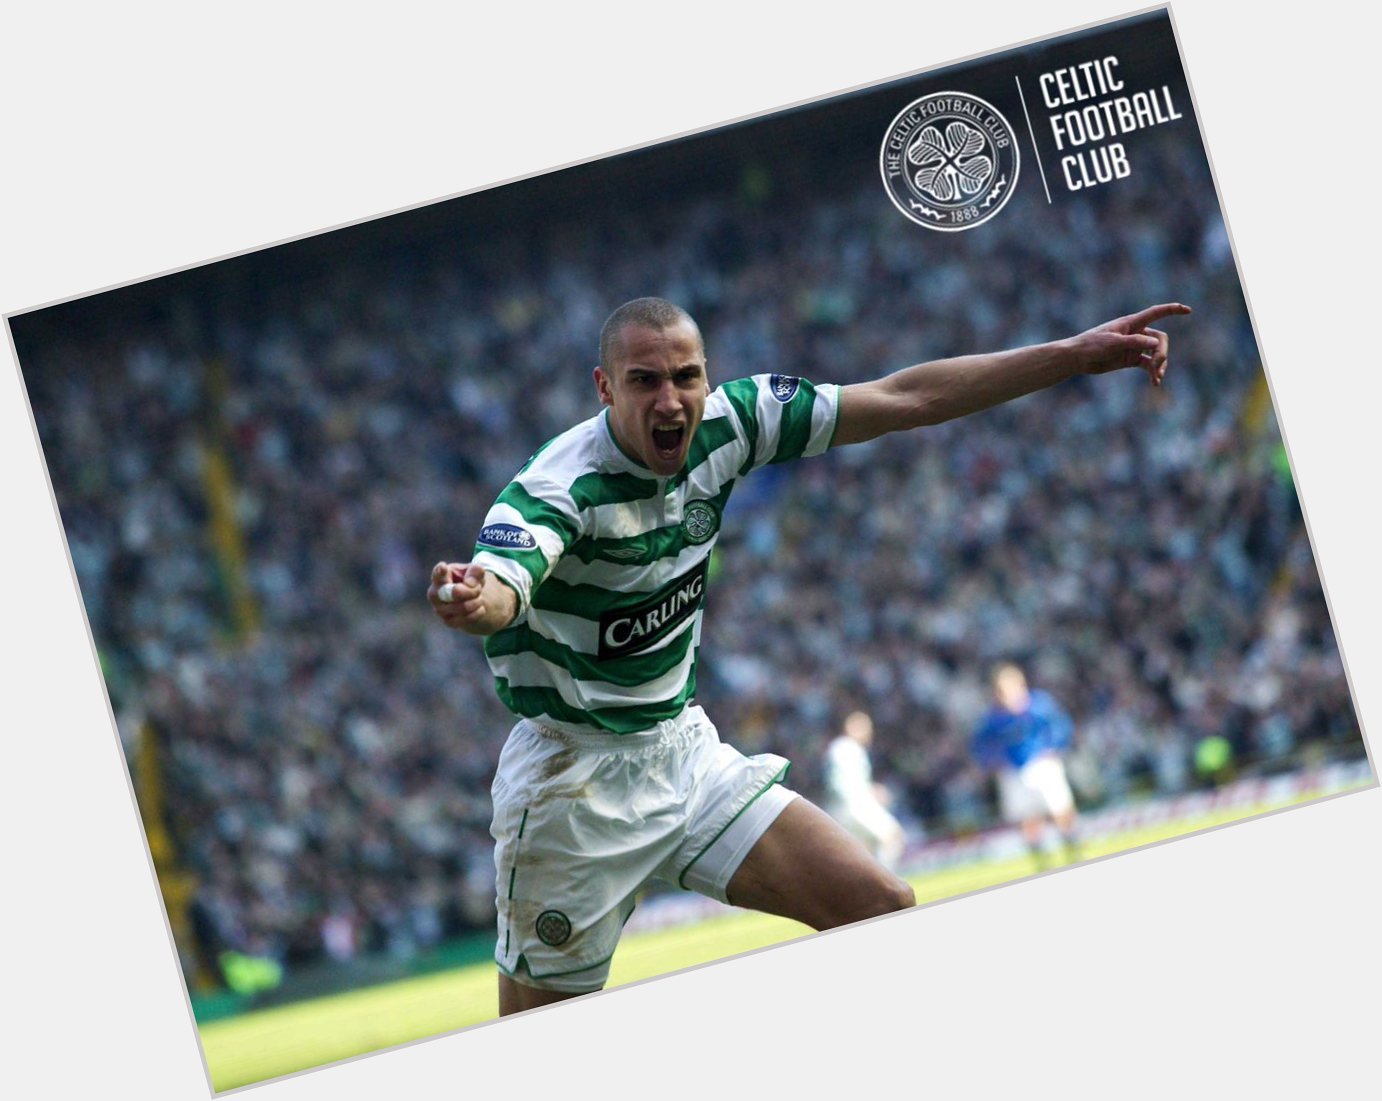 We would like to wish a Happy Birthday to Celtic legend Henrik Larsson   